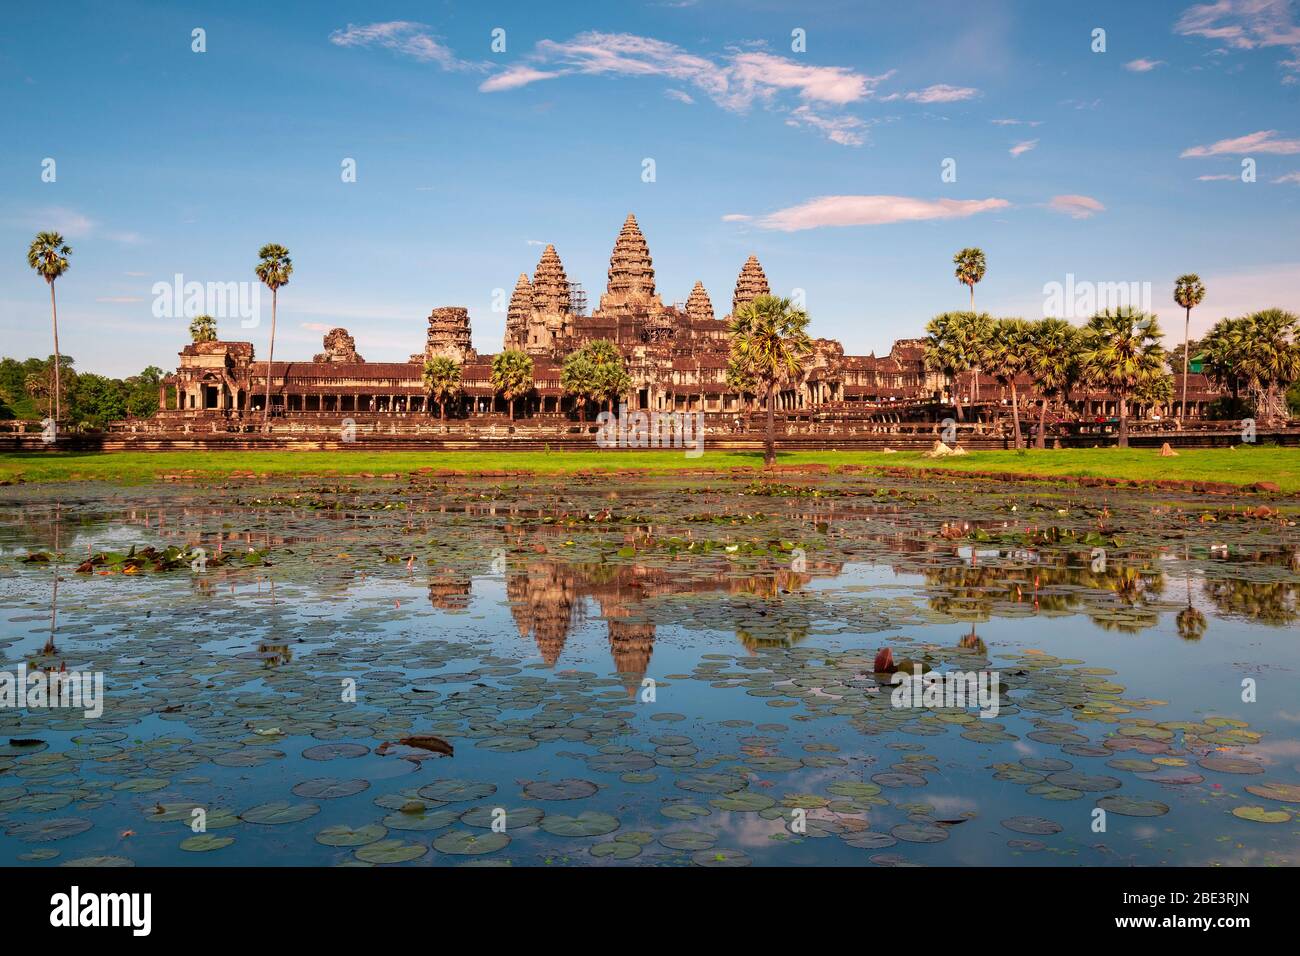 The khmer temple ruin of Angkor Wat at Sunset, Siem Reap, Cambodia. Stock Photo